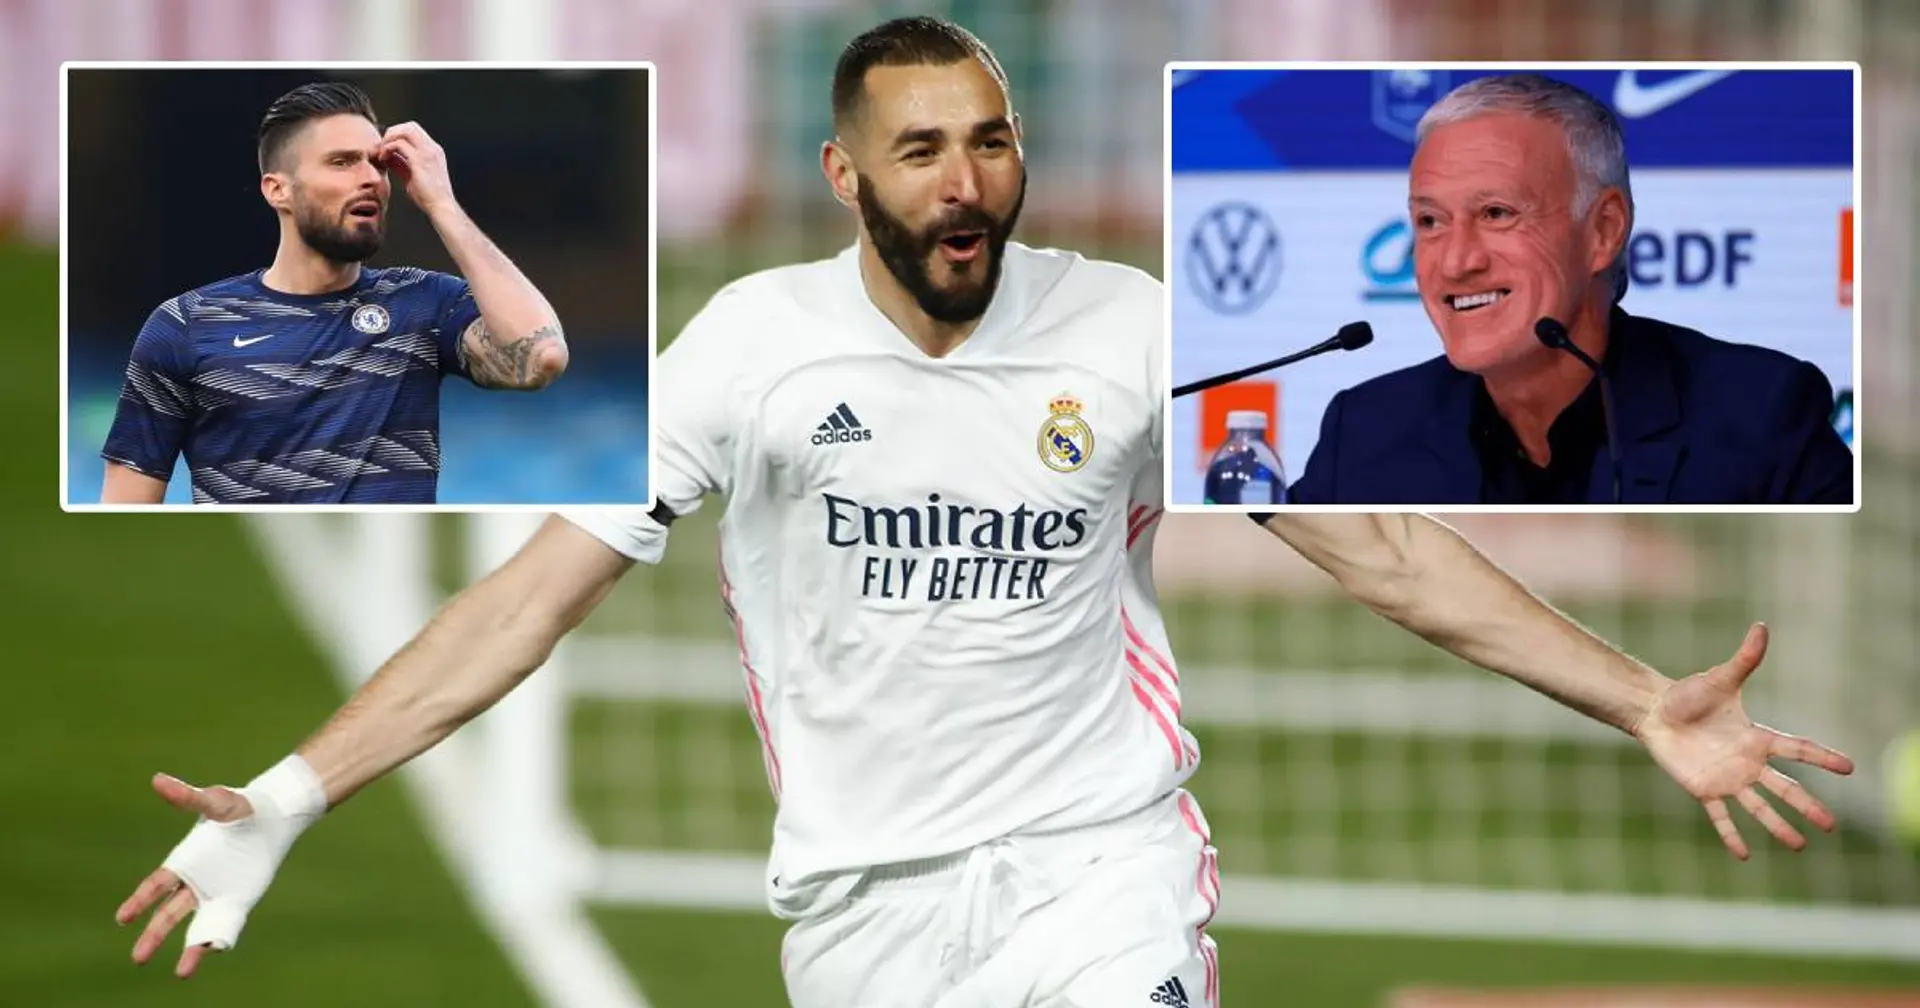 Fan names real reason behind Benzema's inclusion in France's squad - and it's a simple one